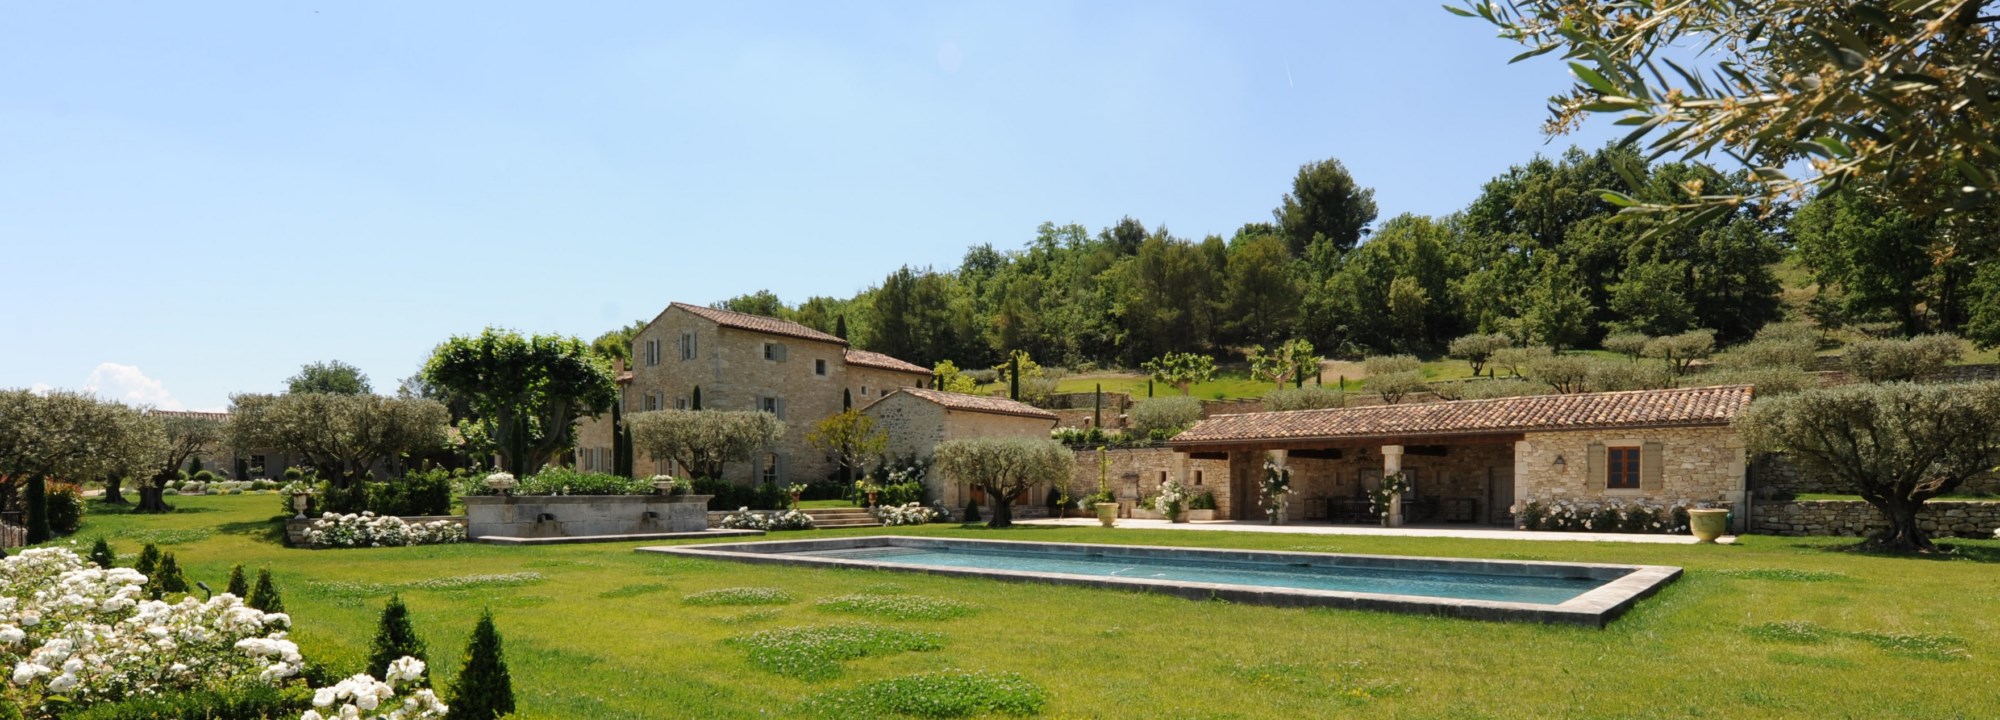 For sale, facing the Luberon, elegant family property, on 3 hectares of grounds